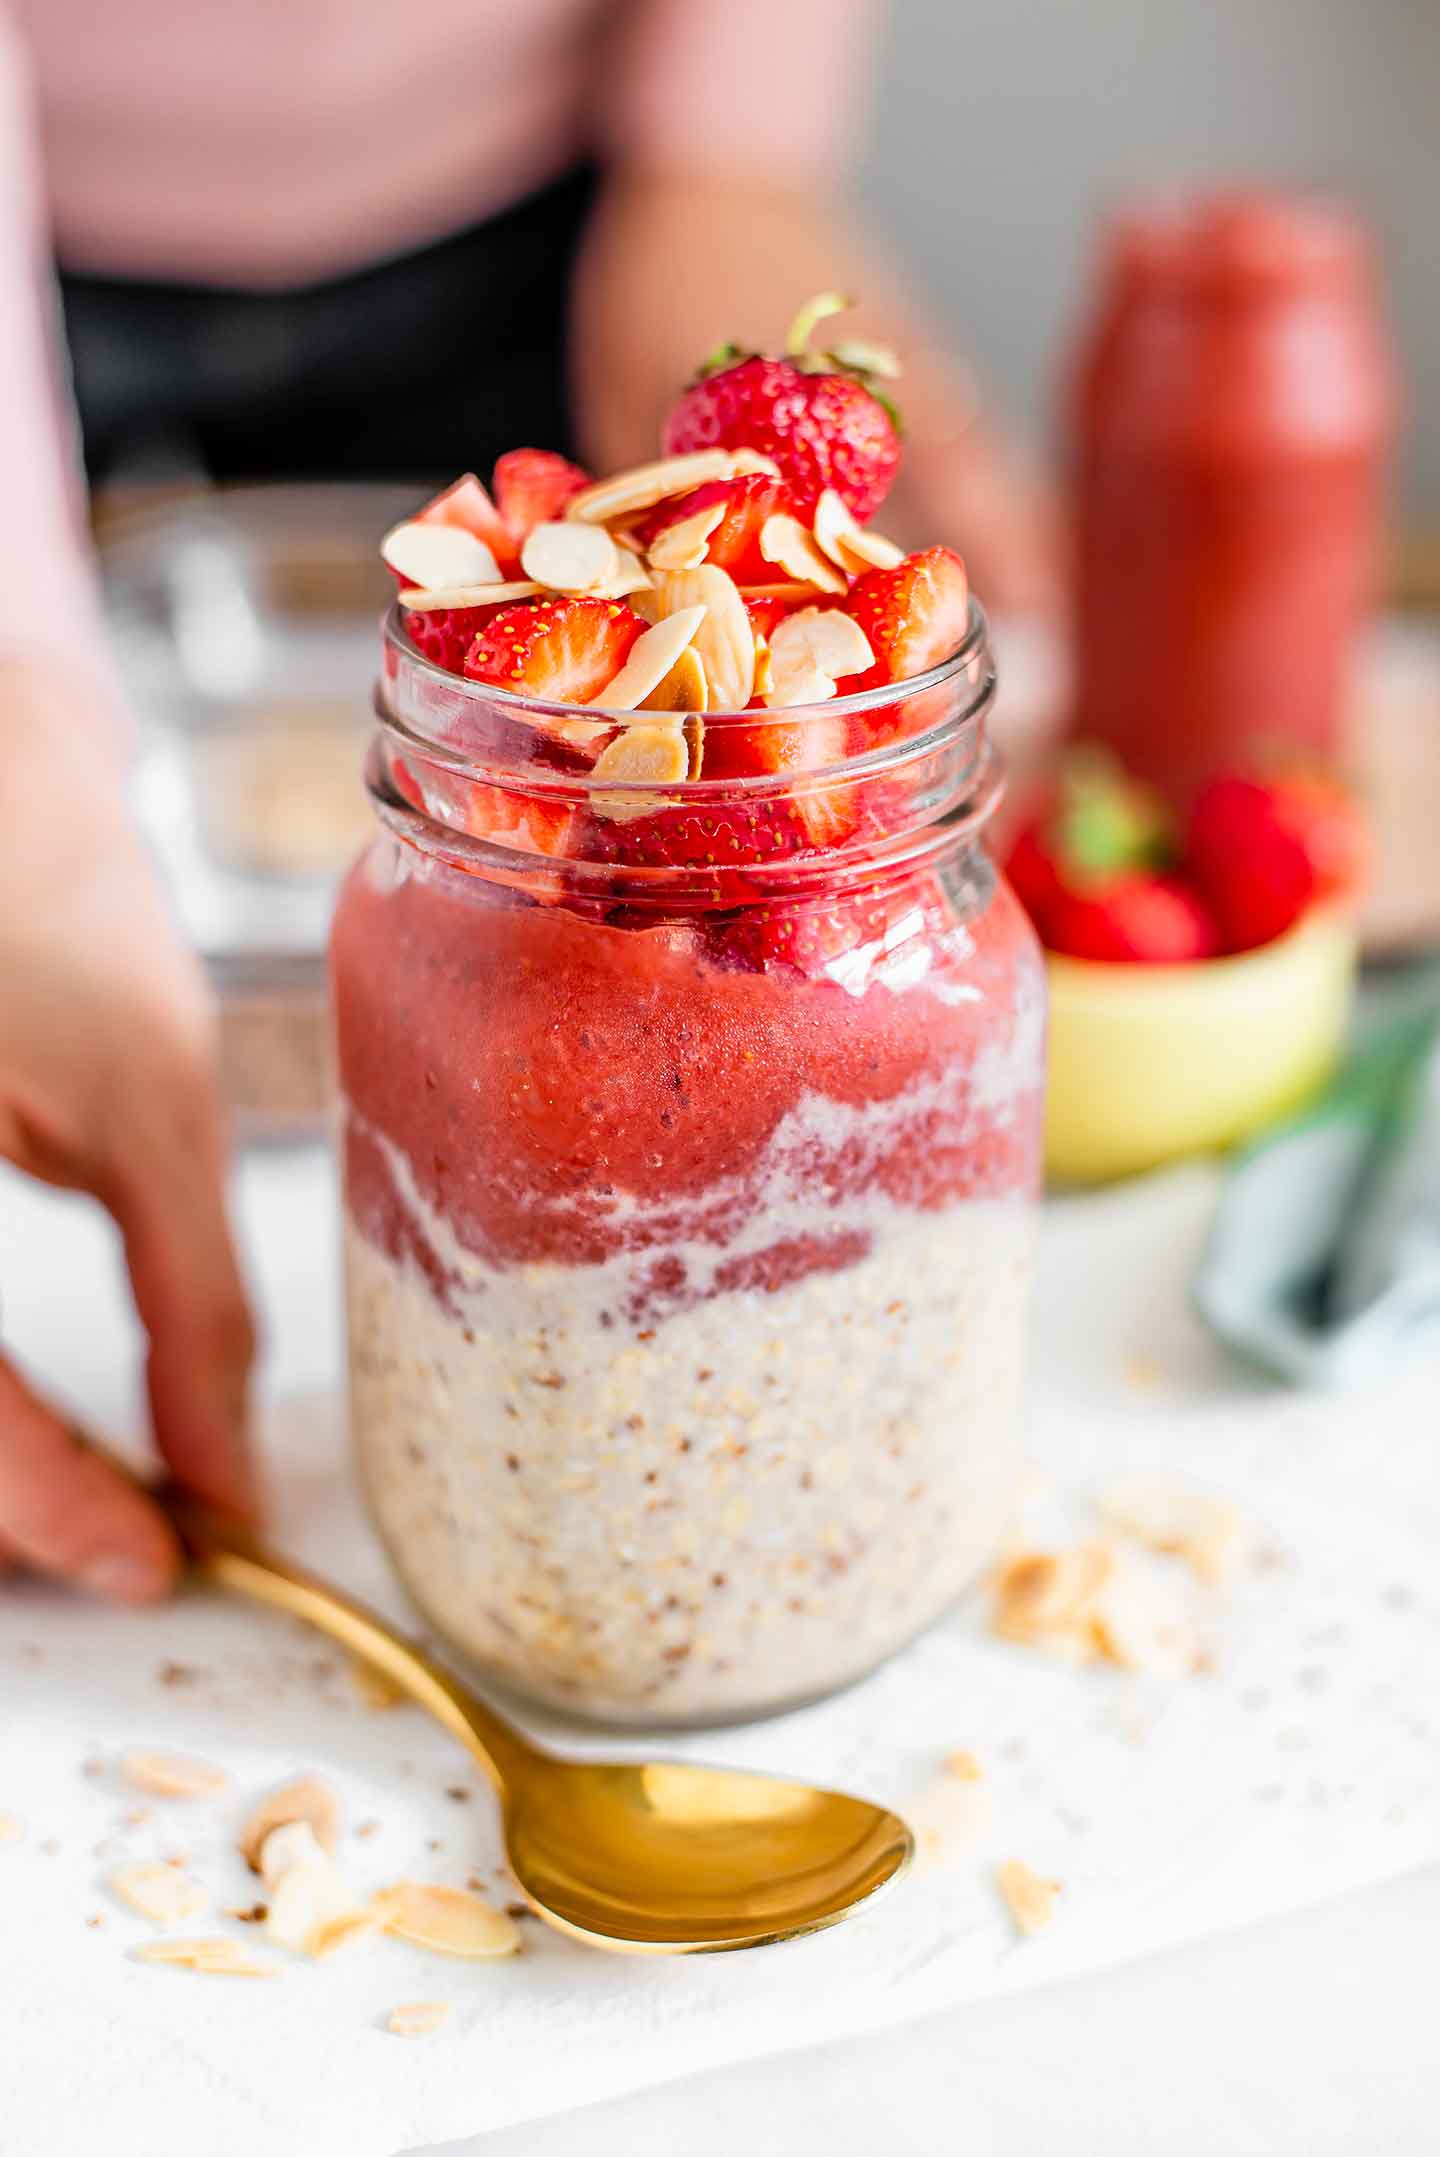 Side view of a mason jar filled halfway with creamy overnight oats, then a layer of thick strawberry jam, topped with diced fresh strawberries and toasted sliced almonds. A hand picks up a gold spoon laying next to the jar.